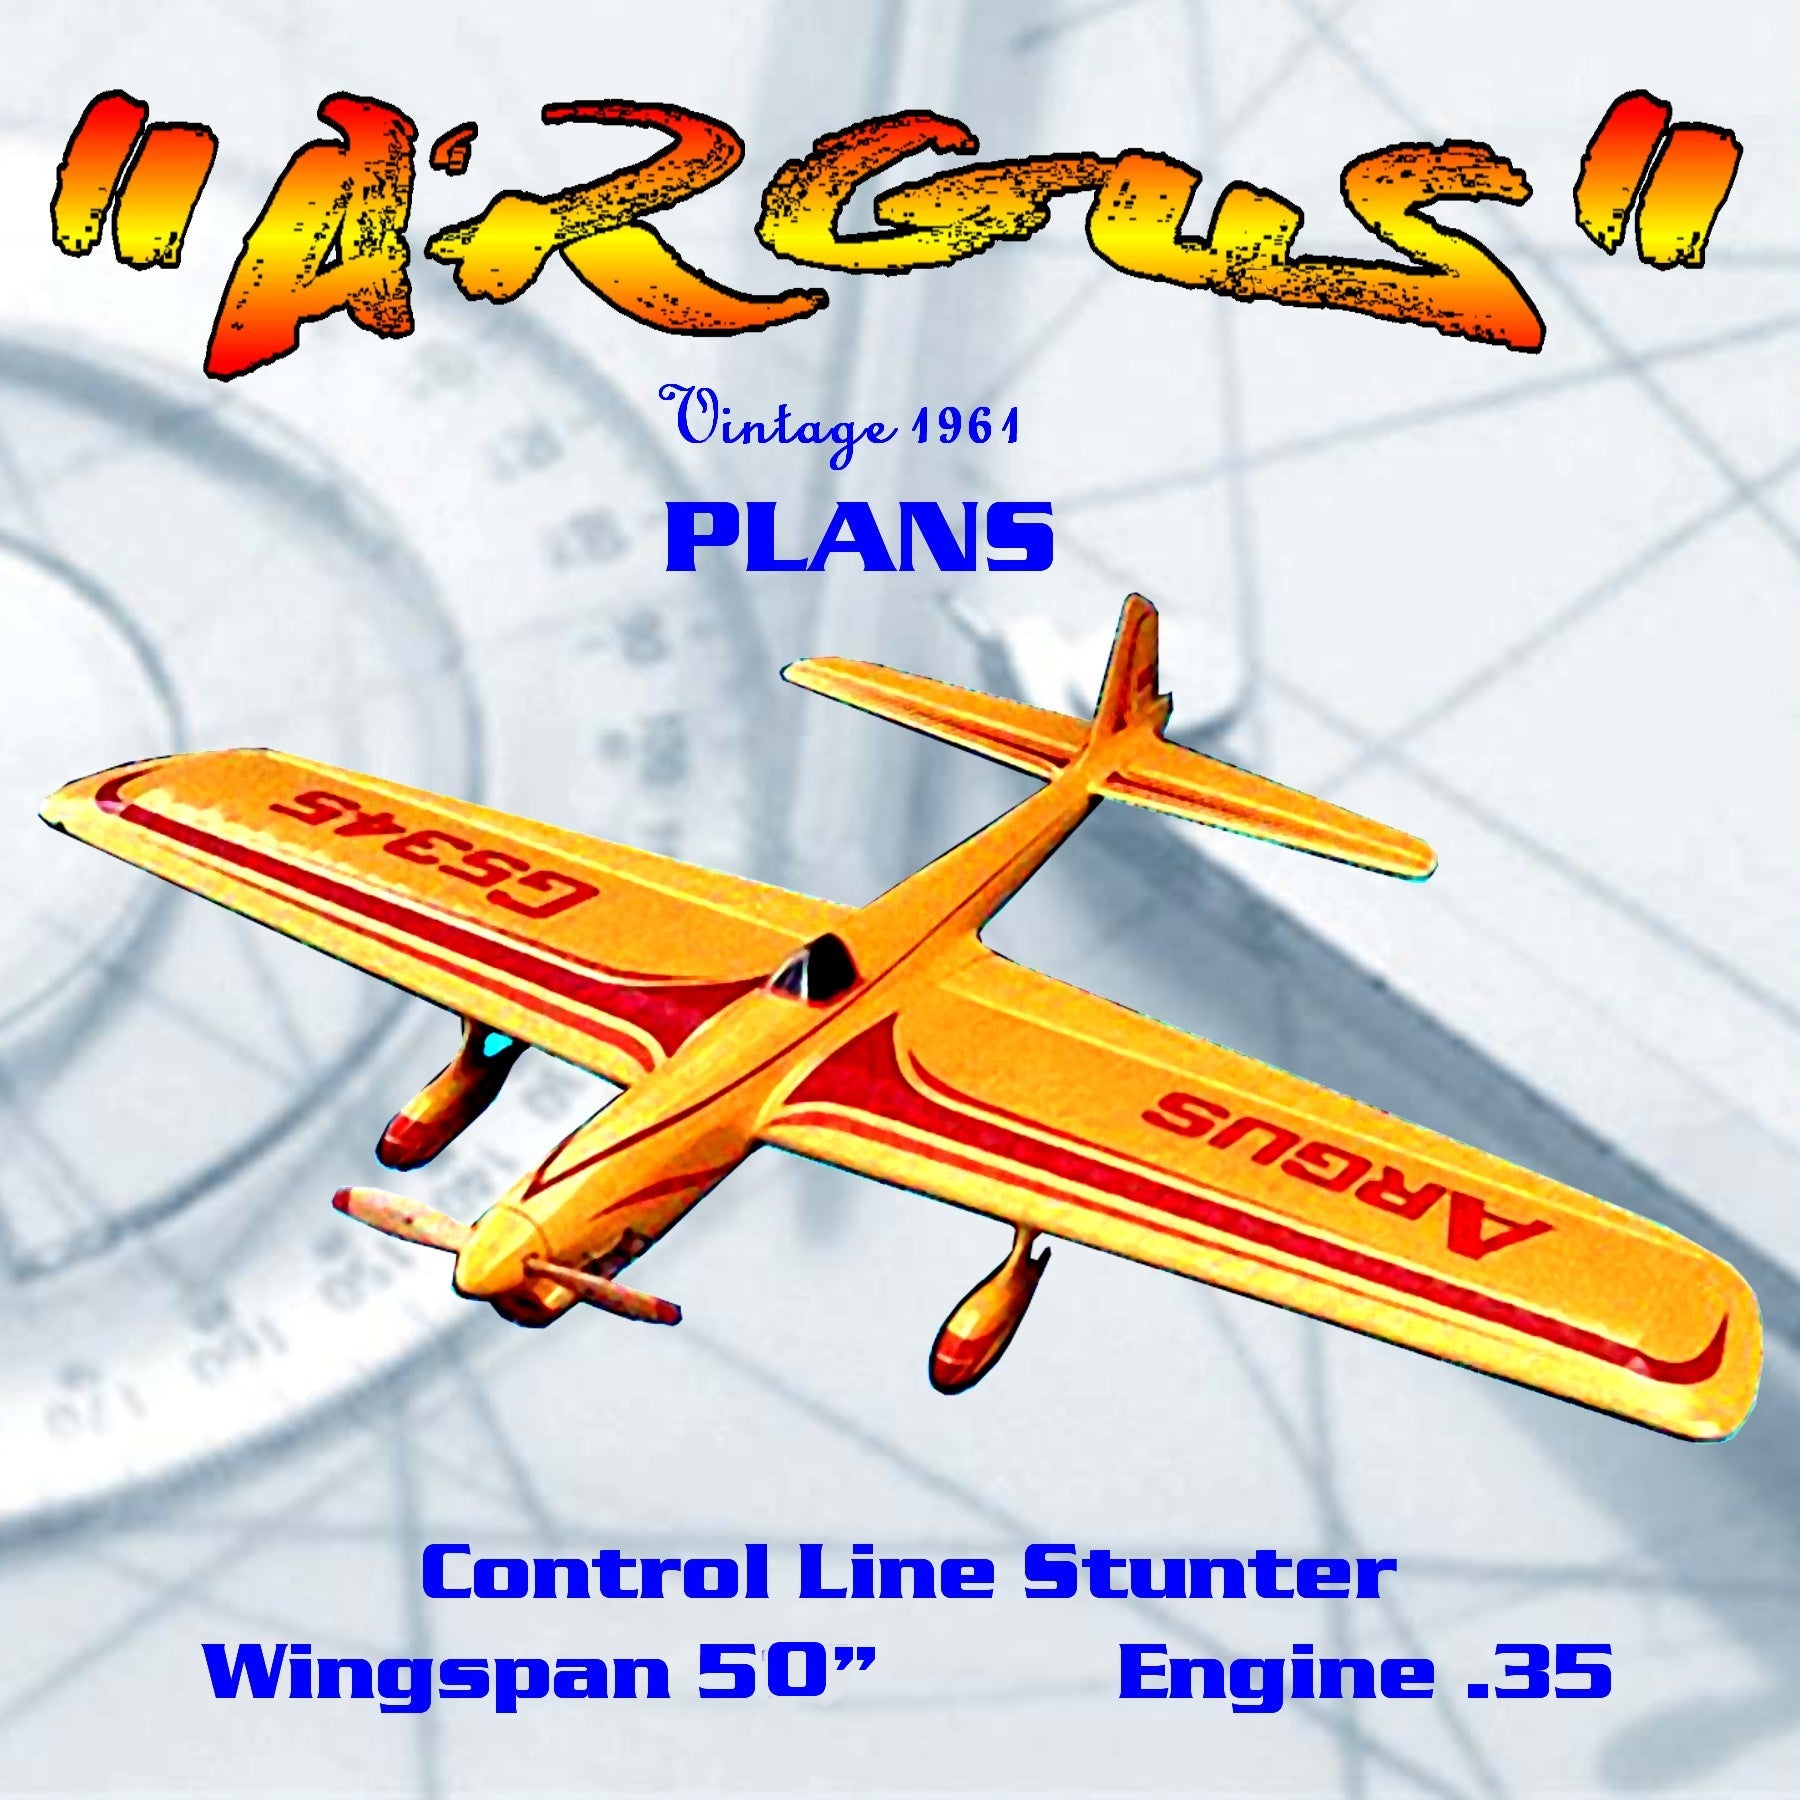 full size printed plans and article w/s 50" .35 engine argus classic stunt